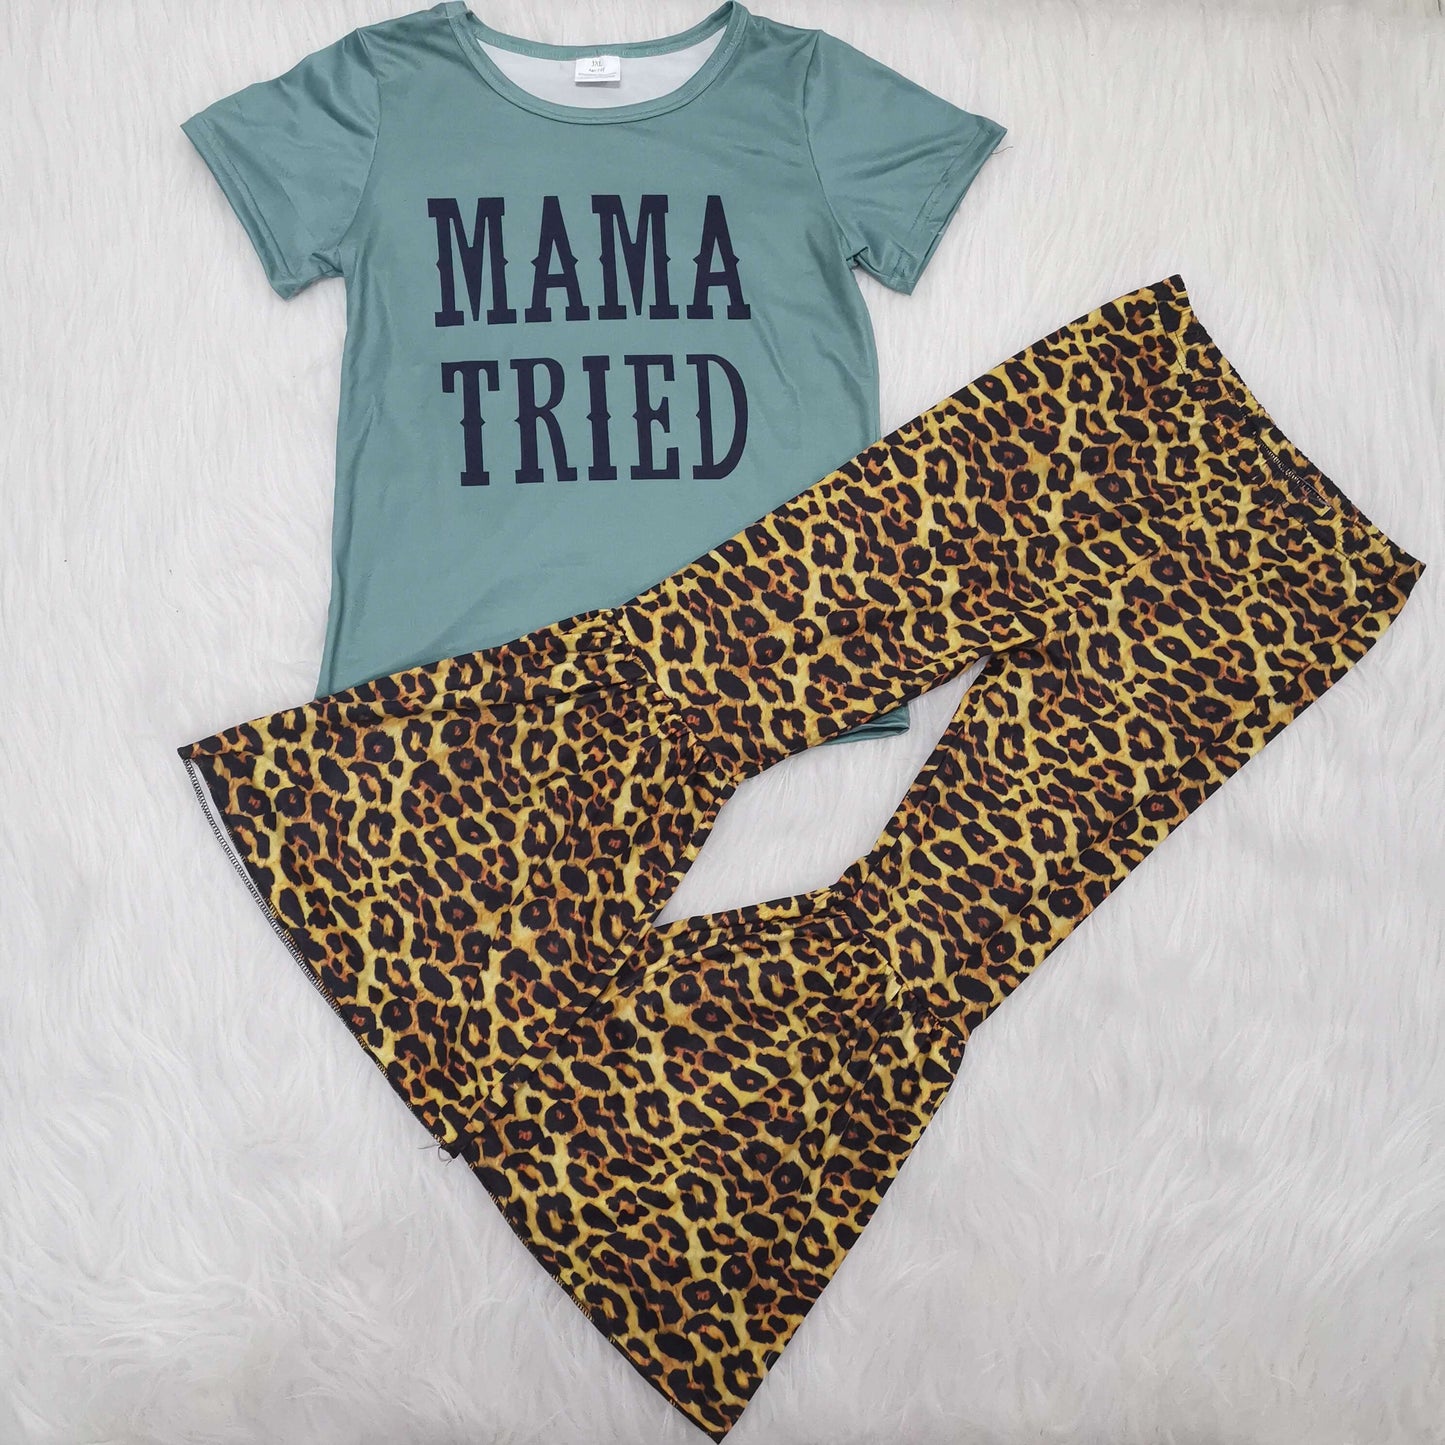 Mama Tried Leopard Bell Bottom Pants Outfit